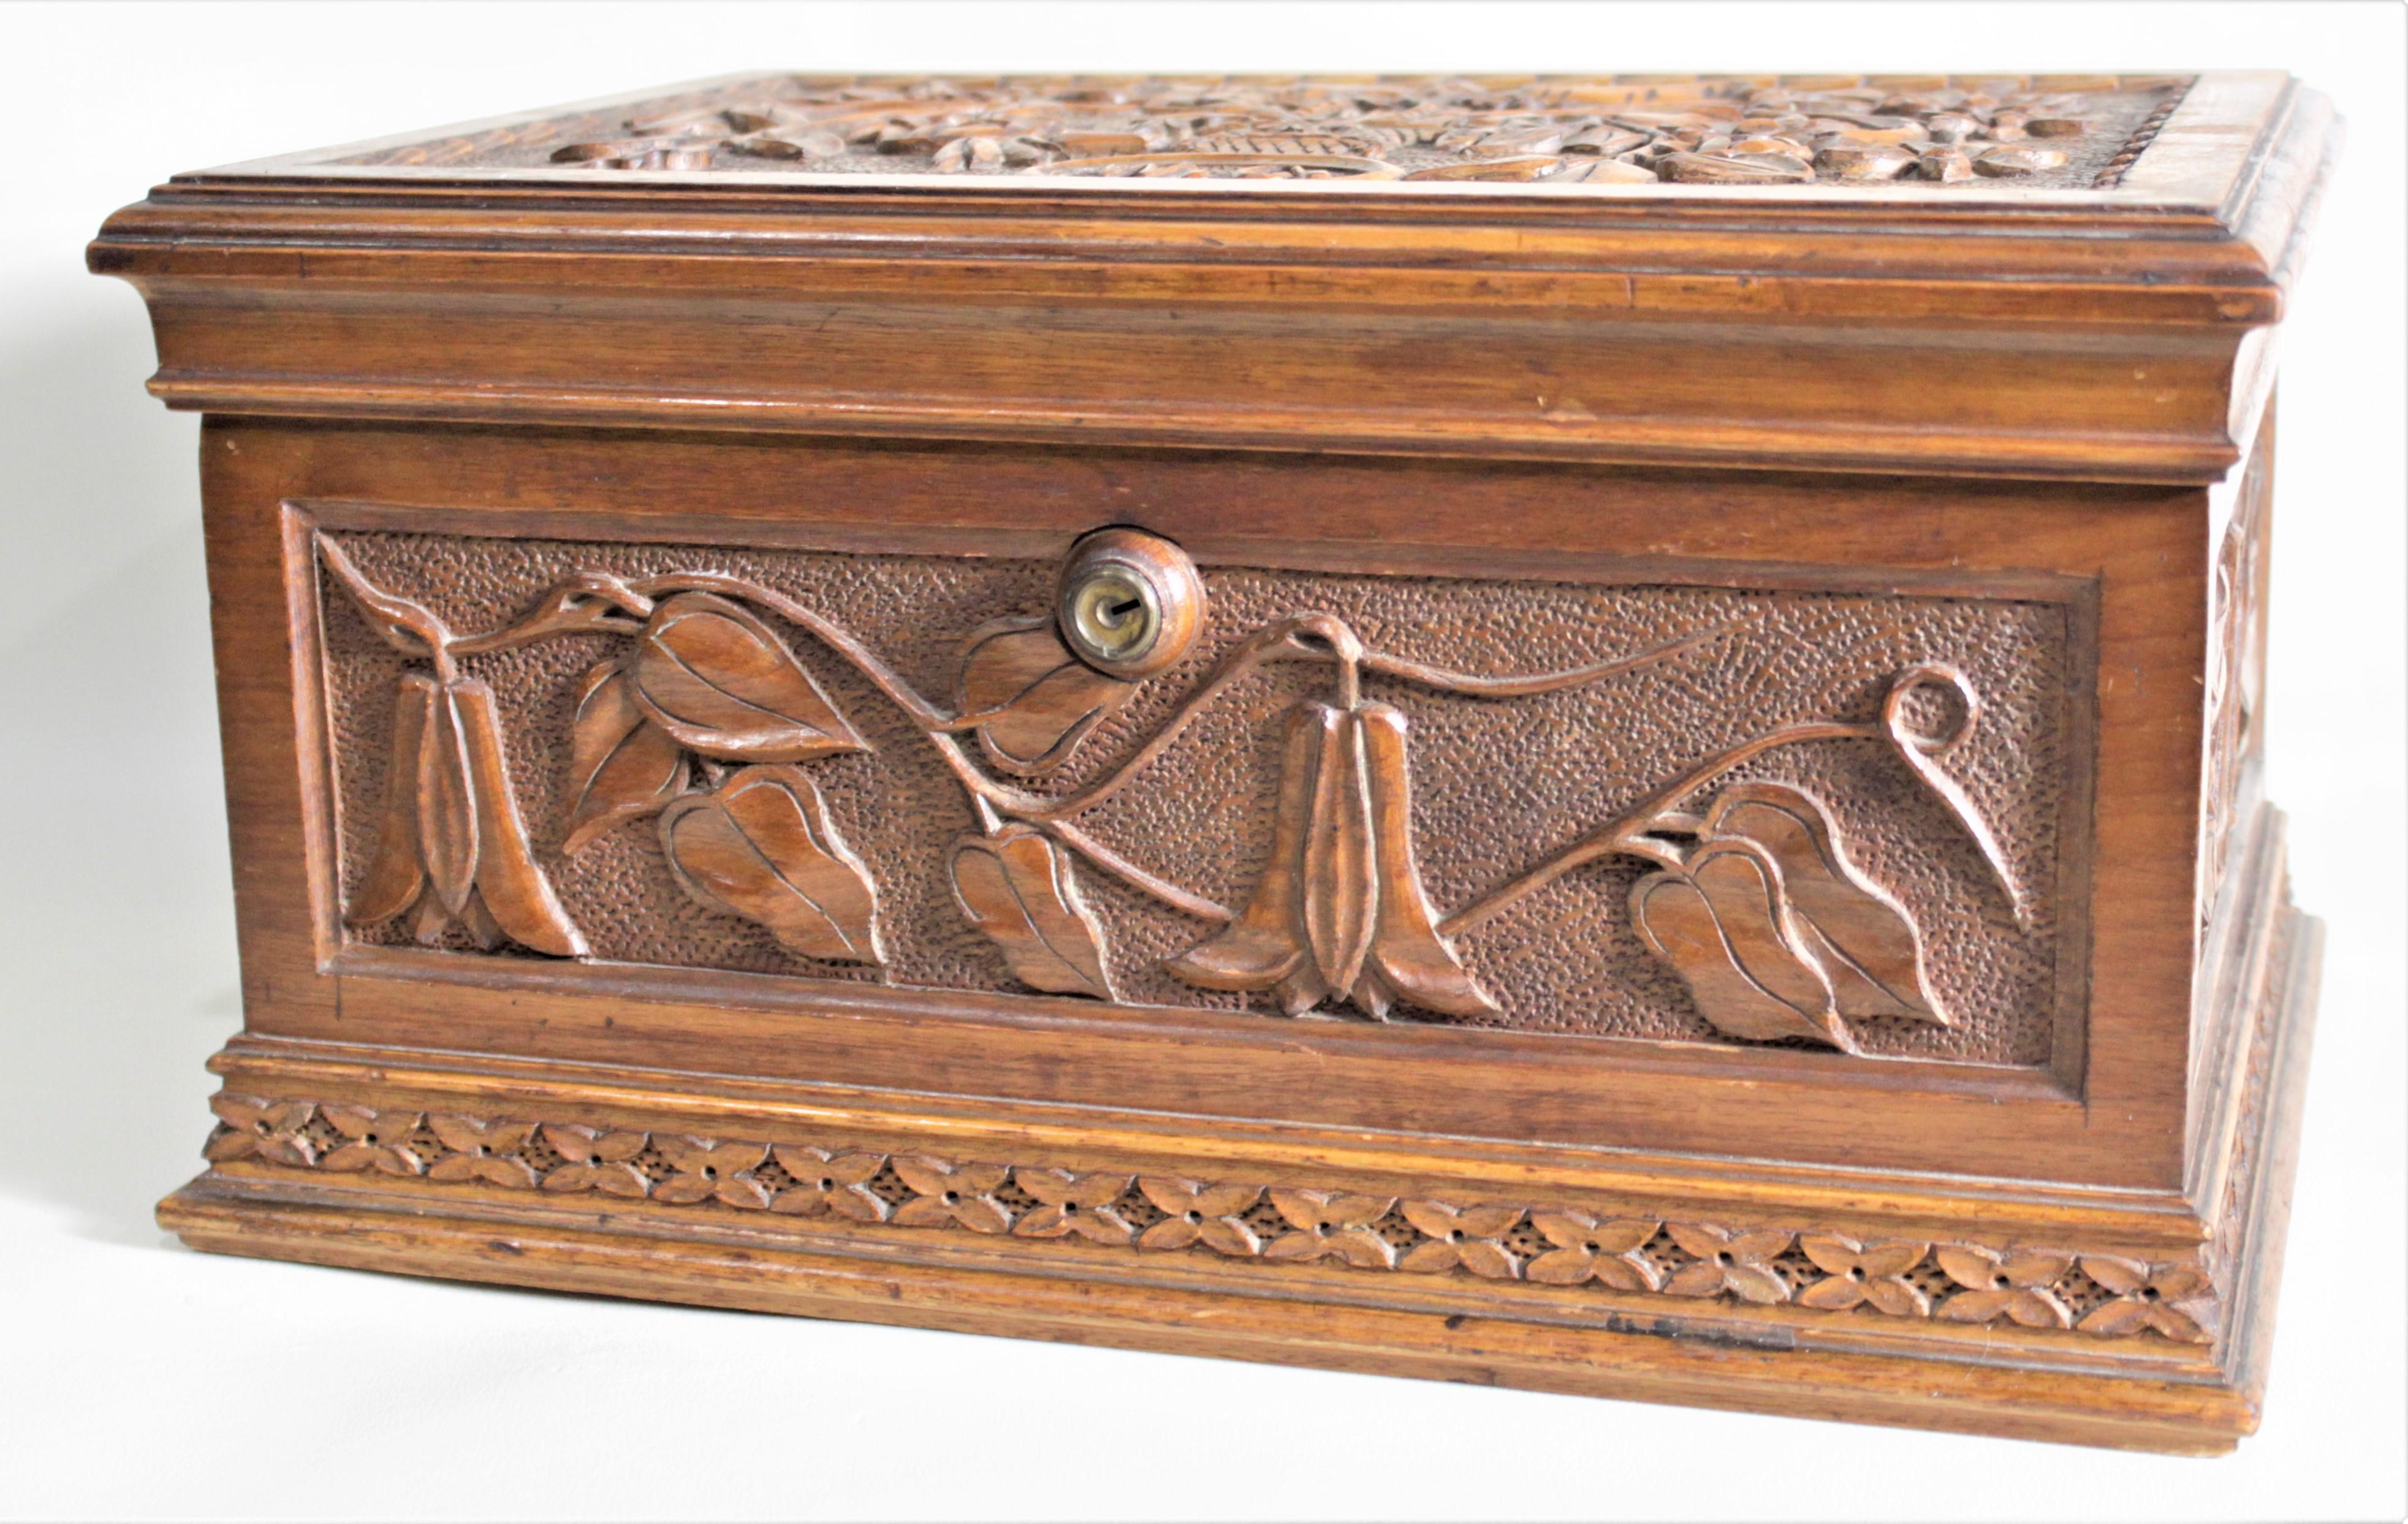 This hand carved wooden jewelry casket is unsigned but believed to have been made in England in circa 1890 in the period Art Nouveau style. The box is ornately carved on all four sides and the top and is done in very intricate panels of floral